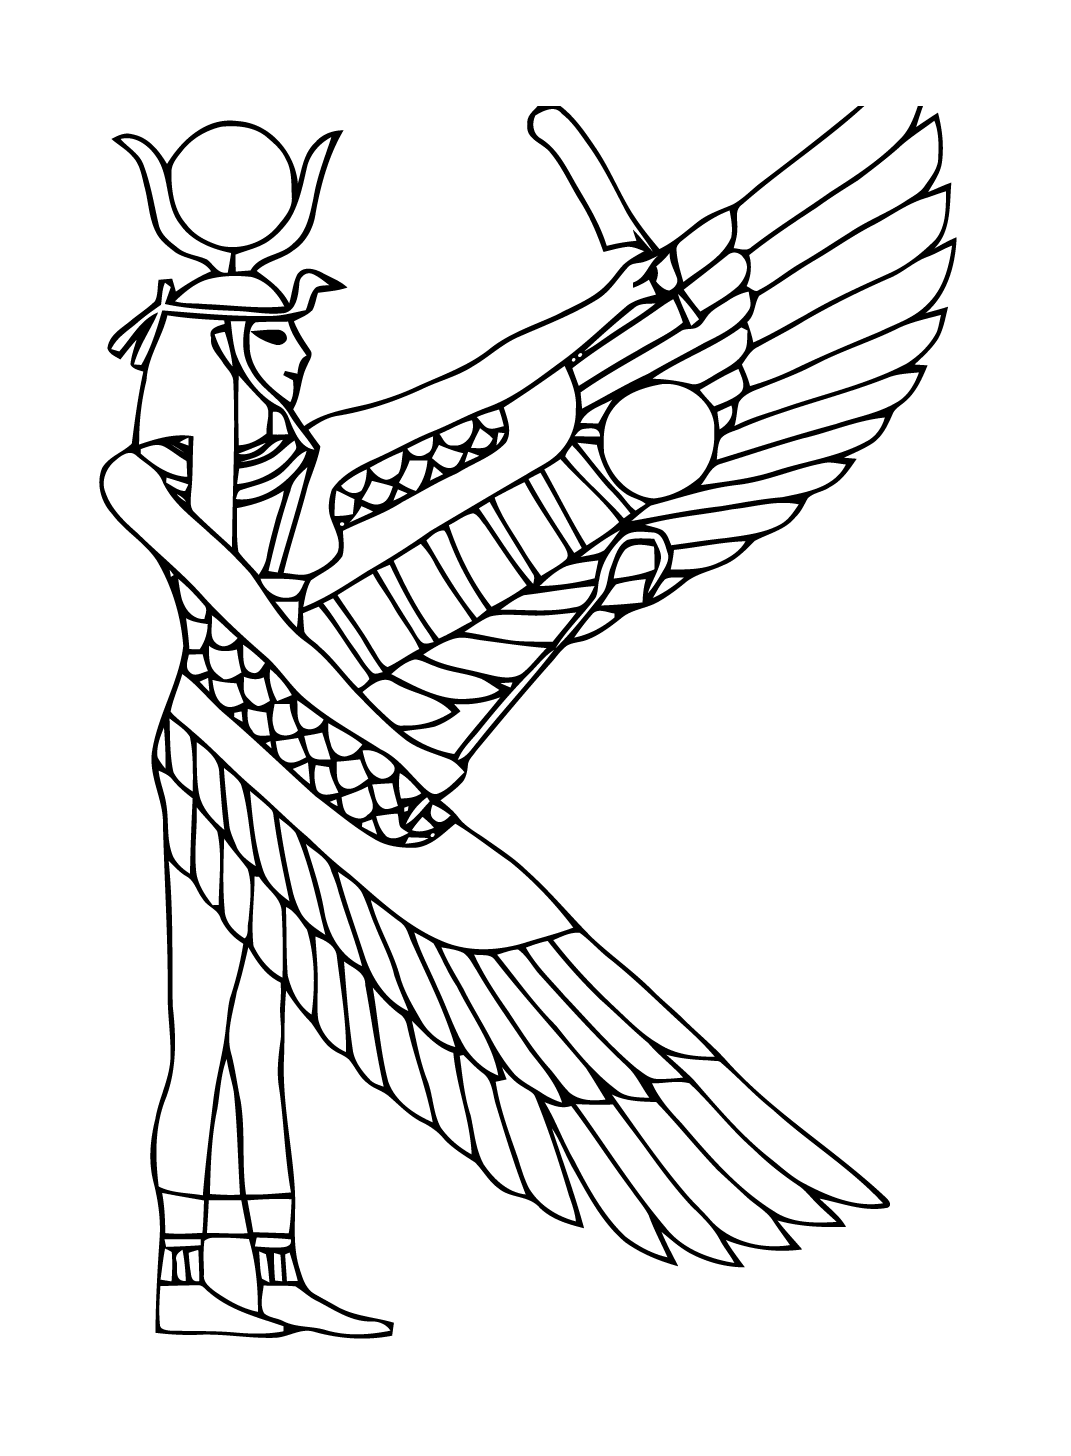 Egypt to print - Egypt Kids Coloring Pages